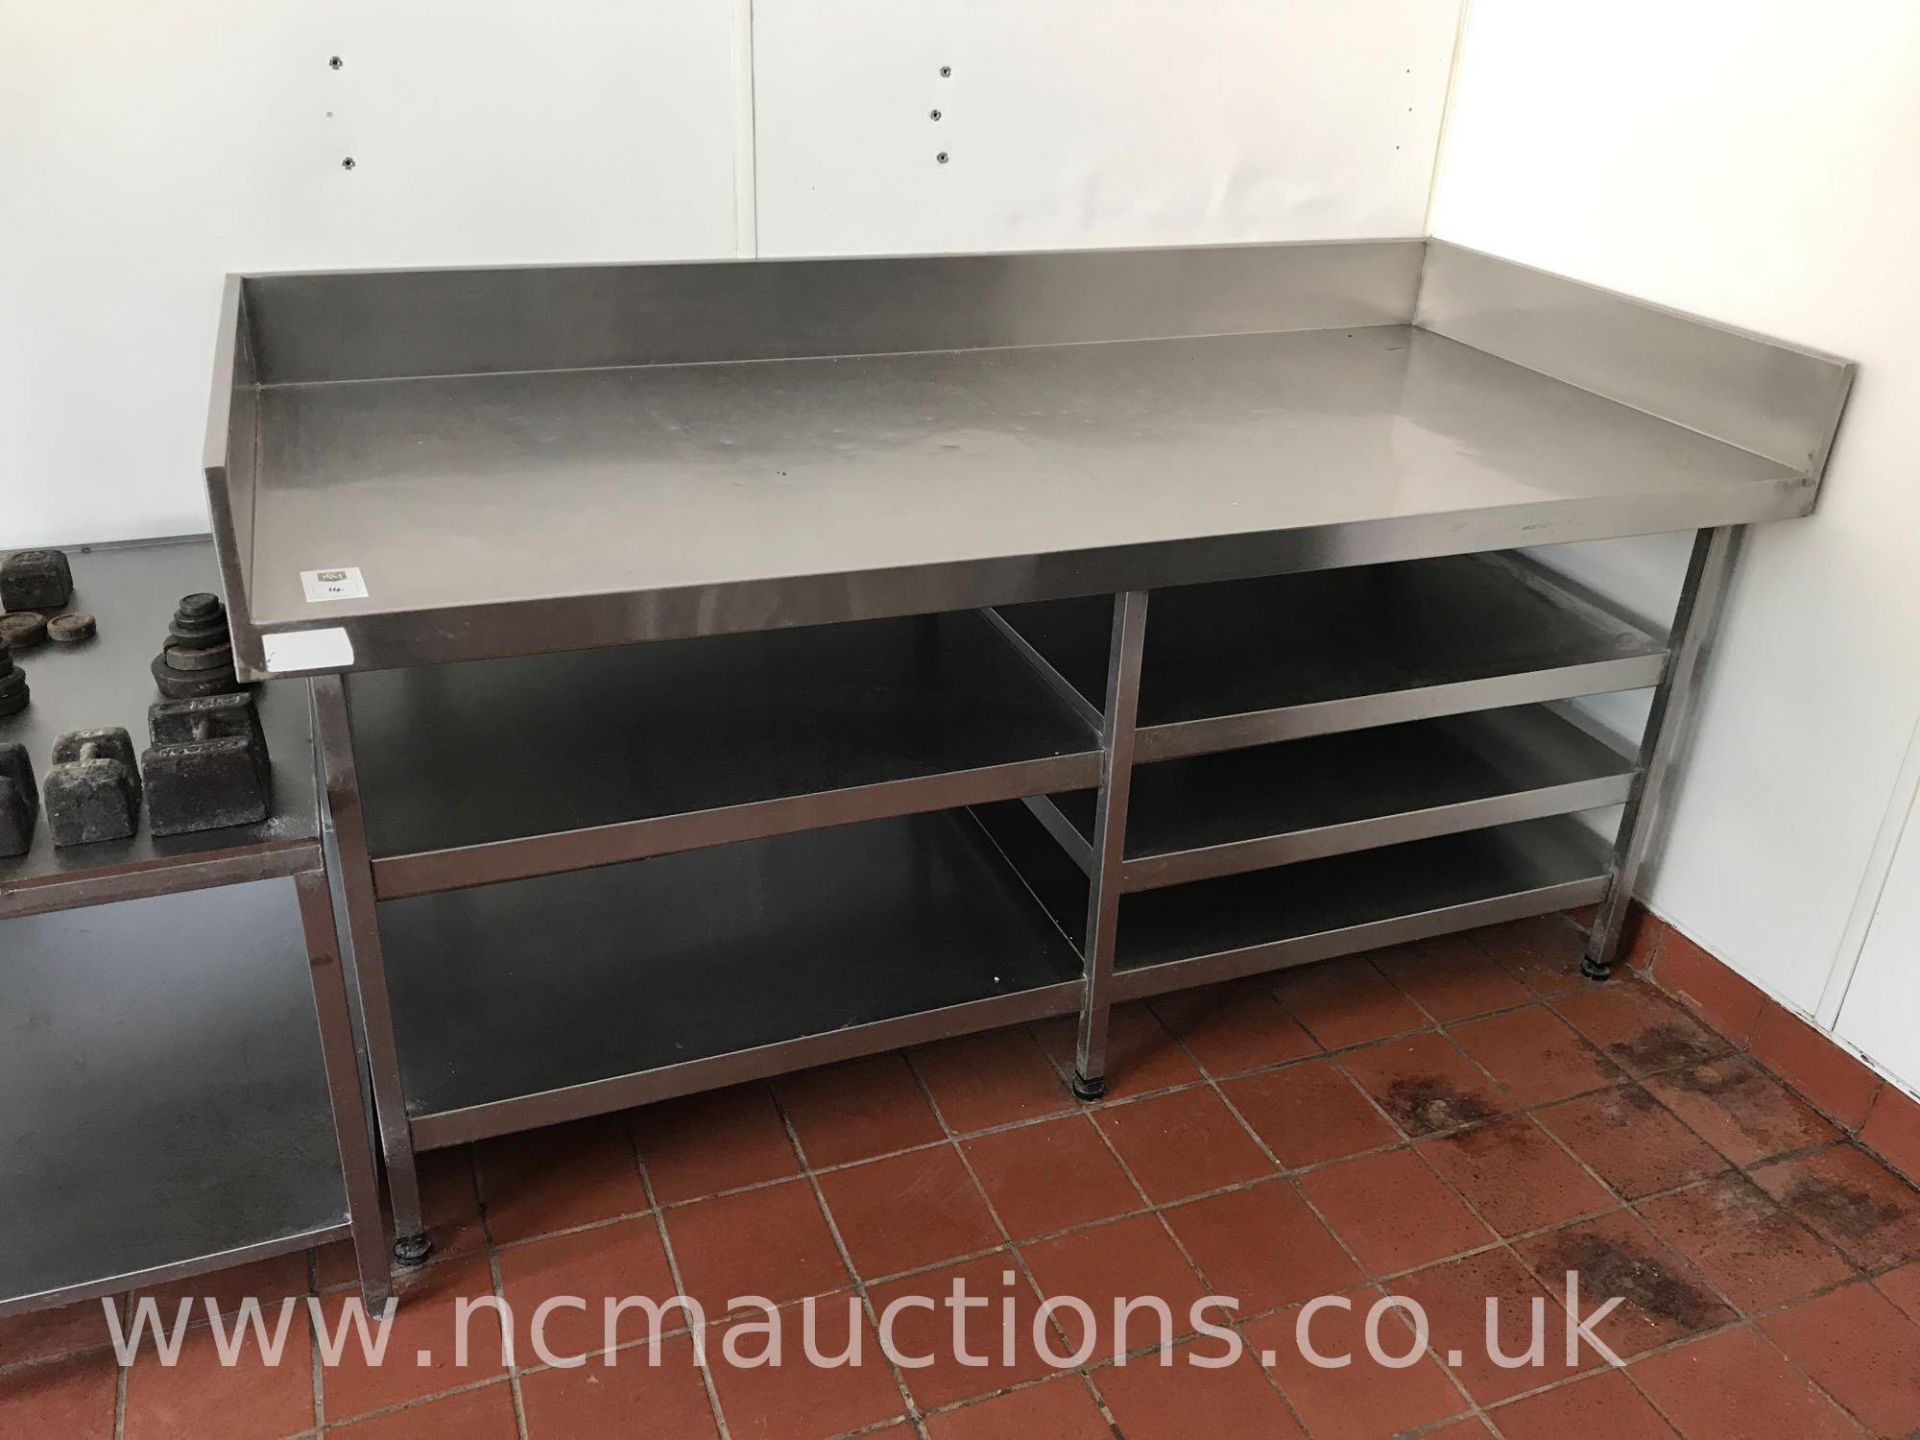 Stainless Steel Preperation Counter with Undercounter Shelves